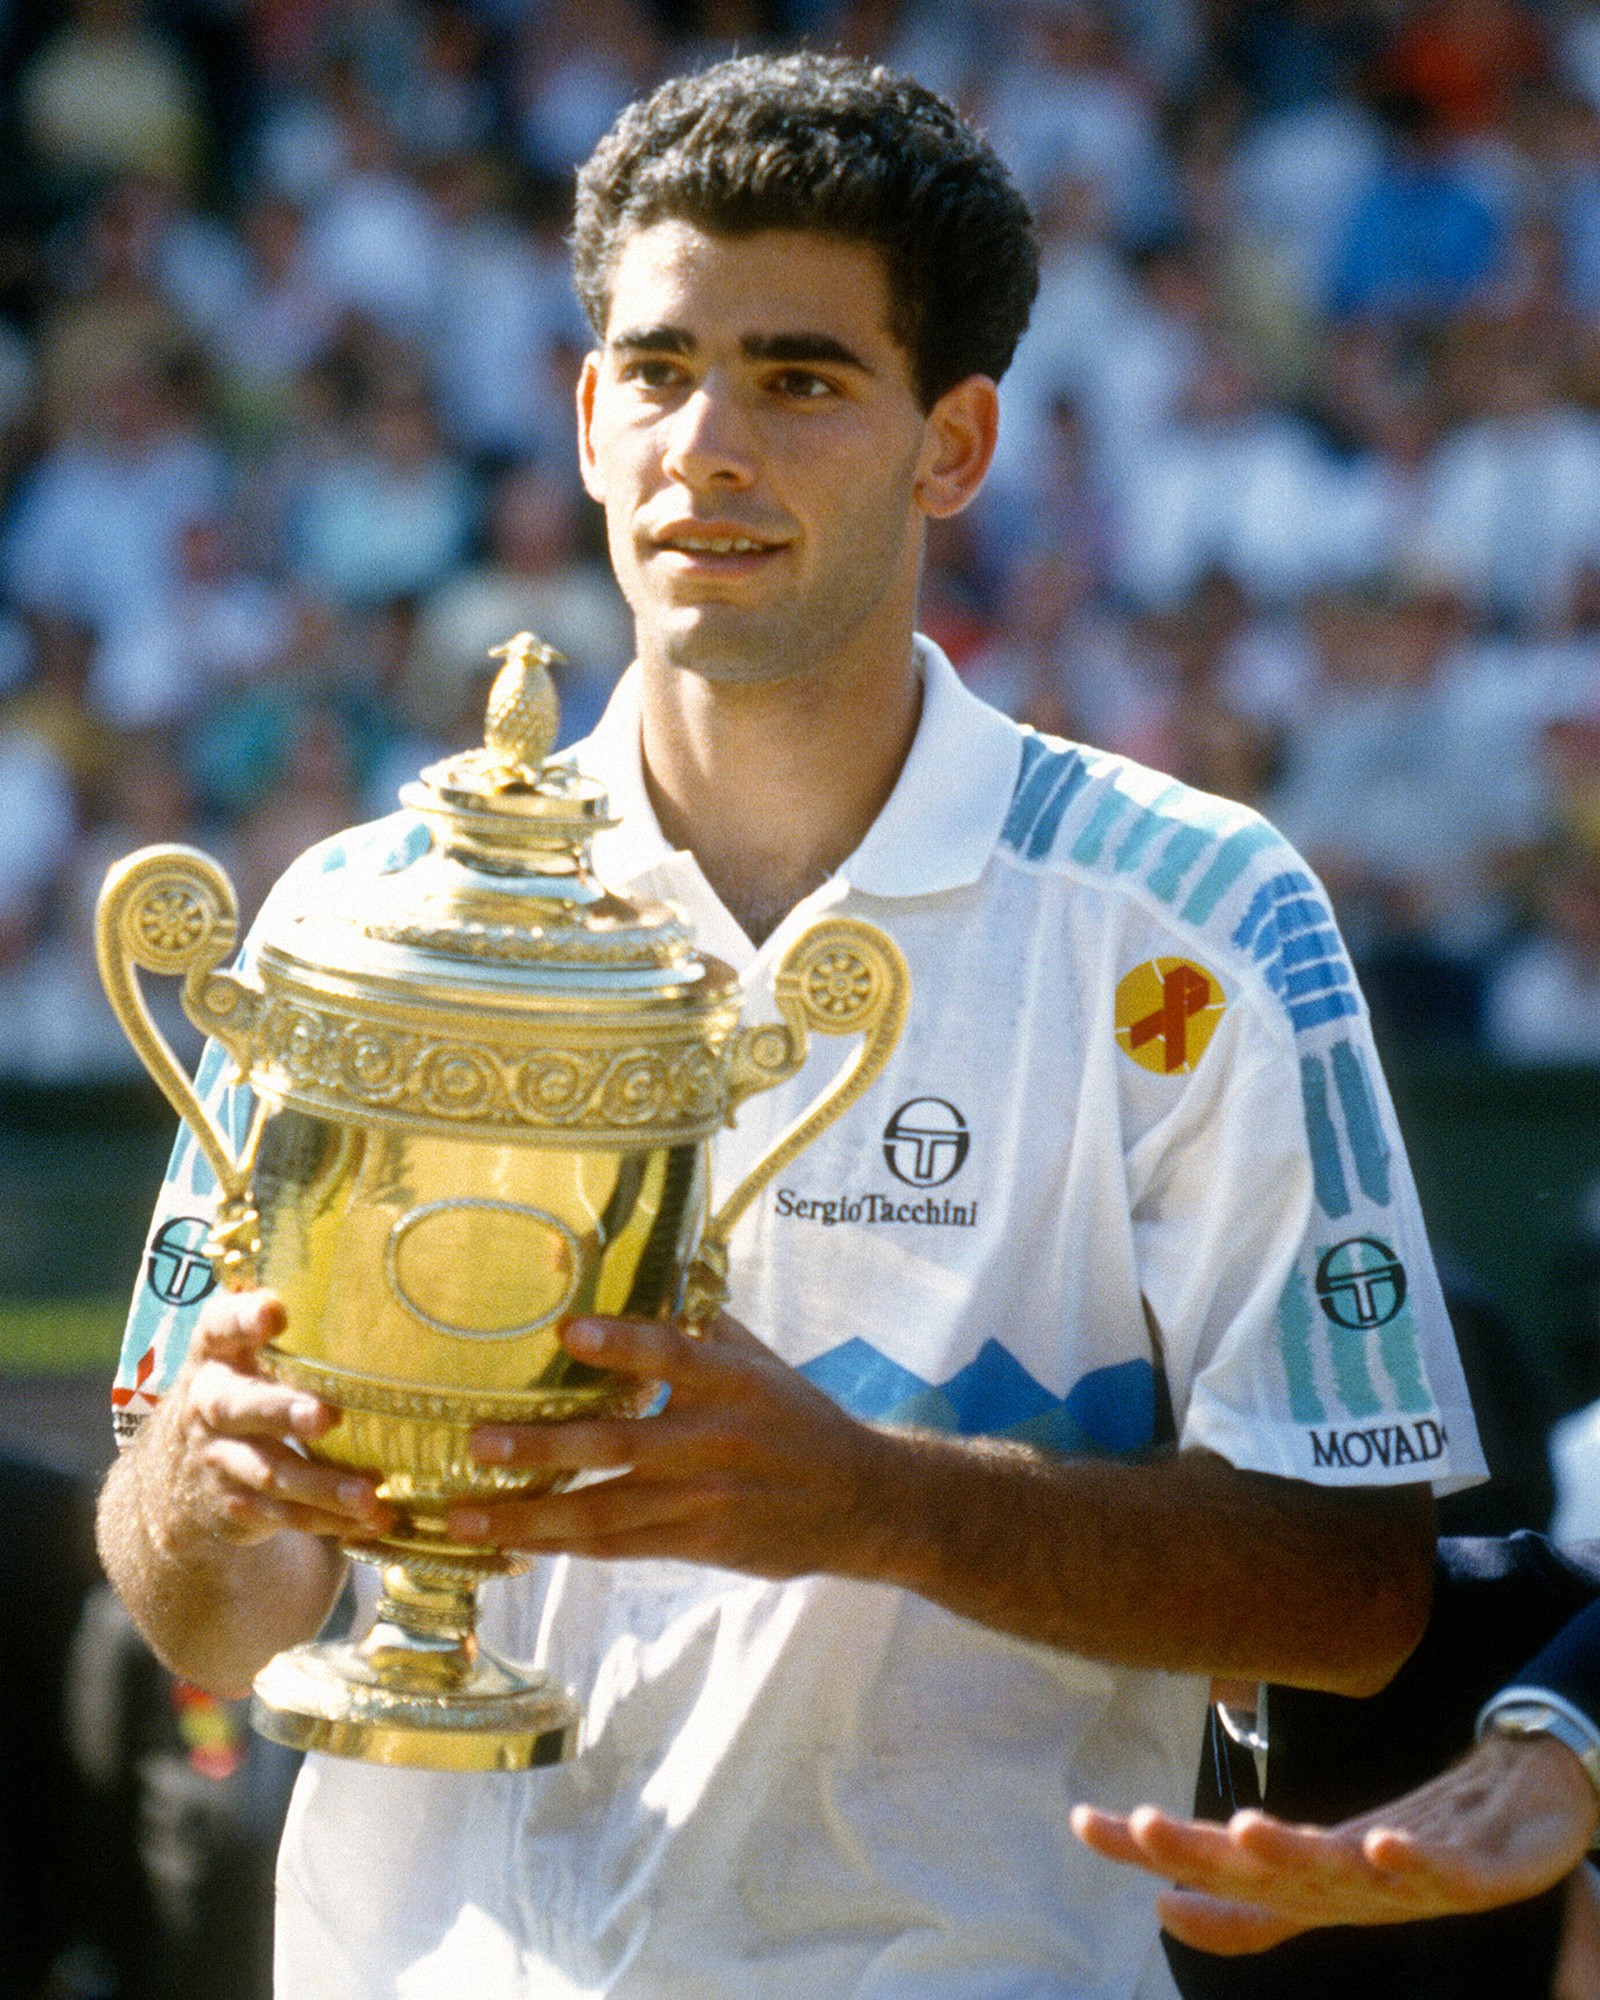 Happy 50th birthday to \"Pistol\" Pete Sampras, one of the nicest tennis champions ever! 